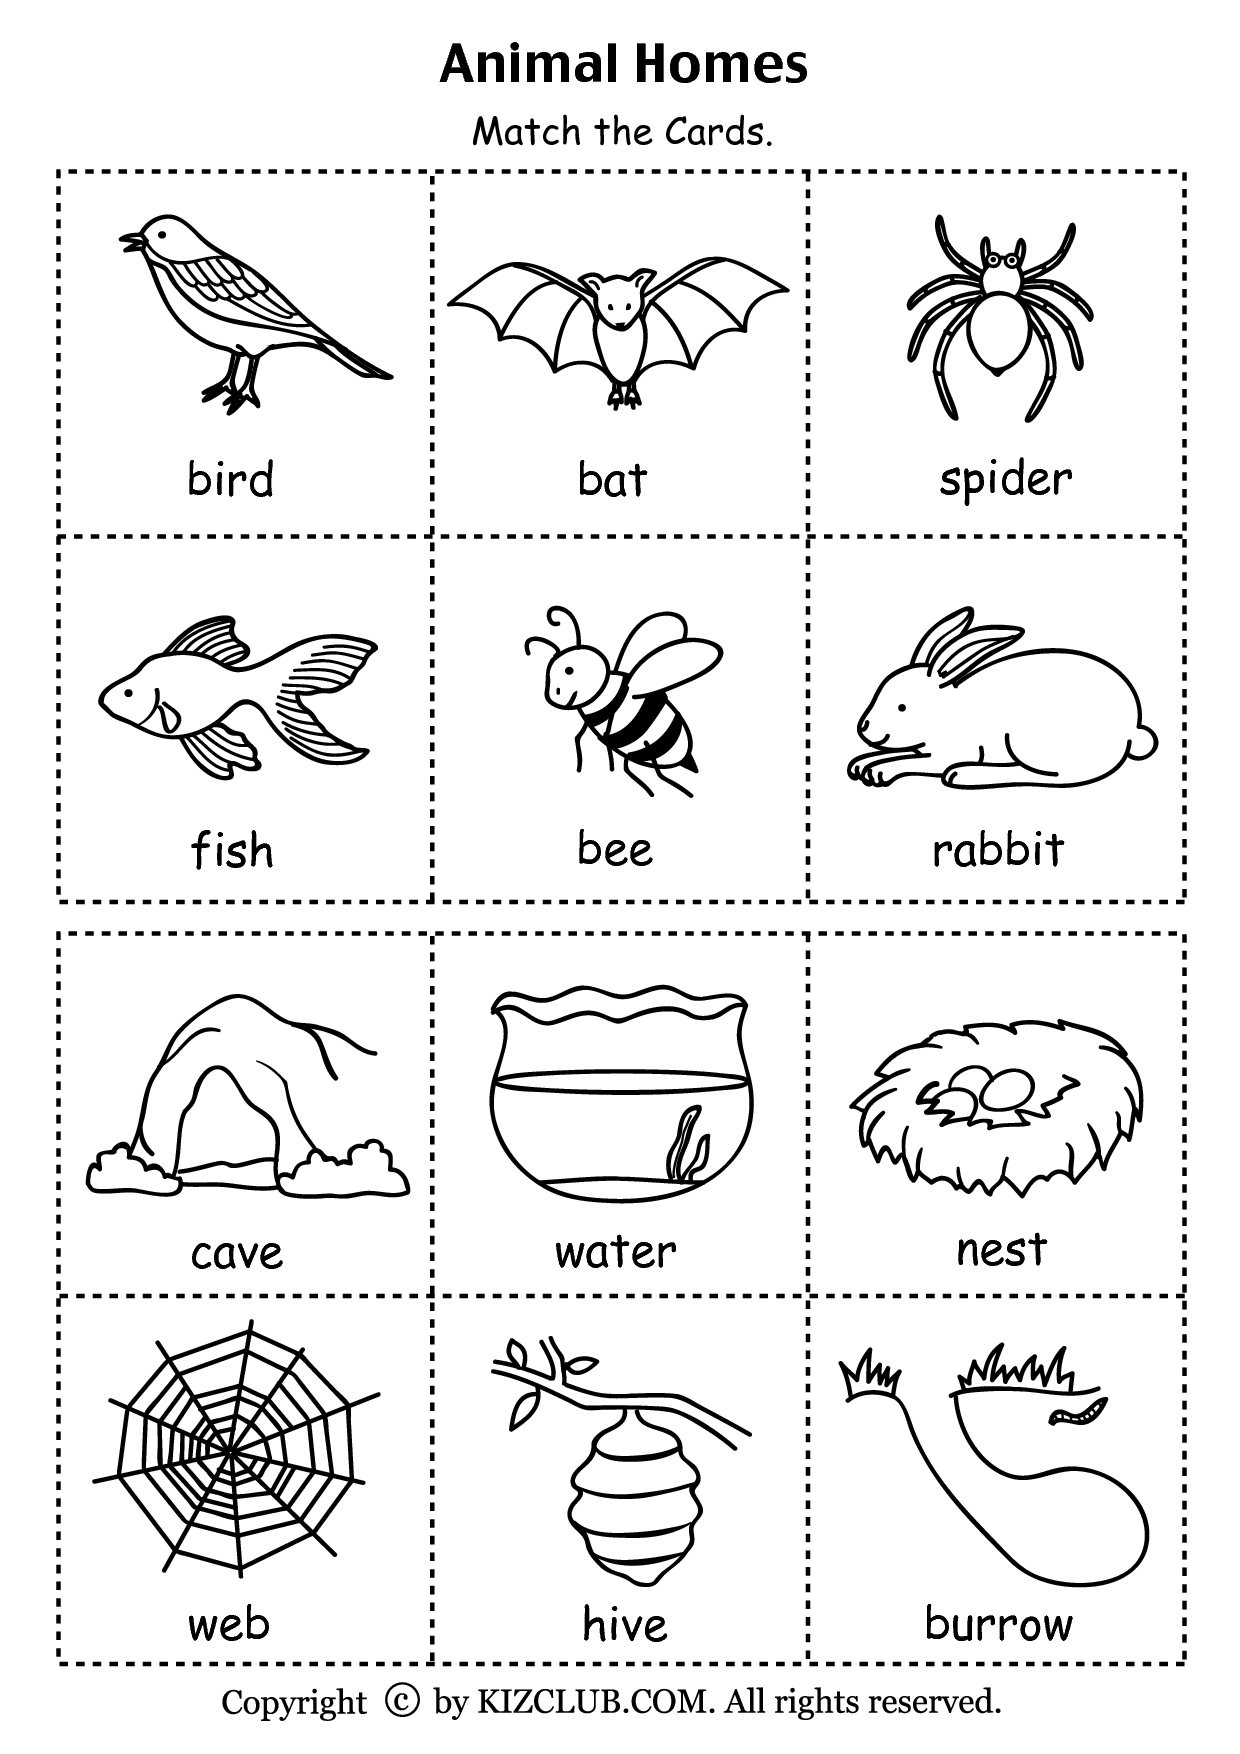 9-best-images-of-food-to-animal-match-worksheet-animal-habitats-and